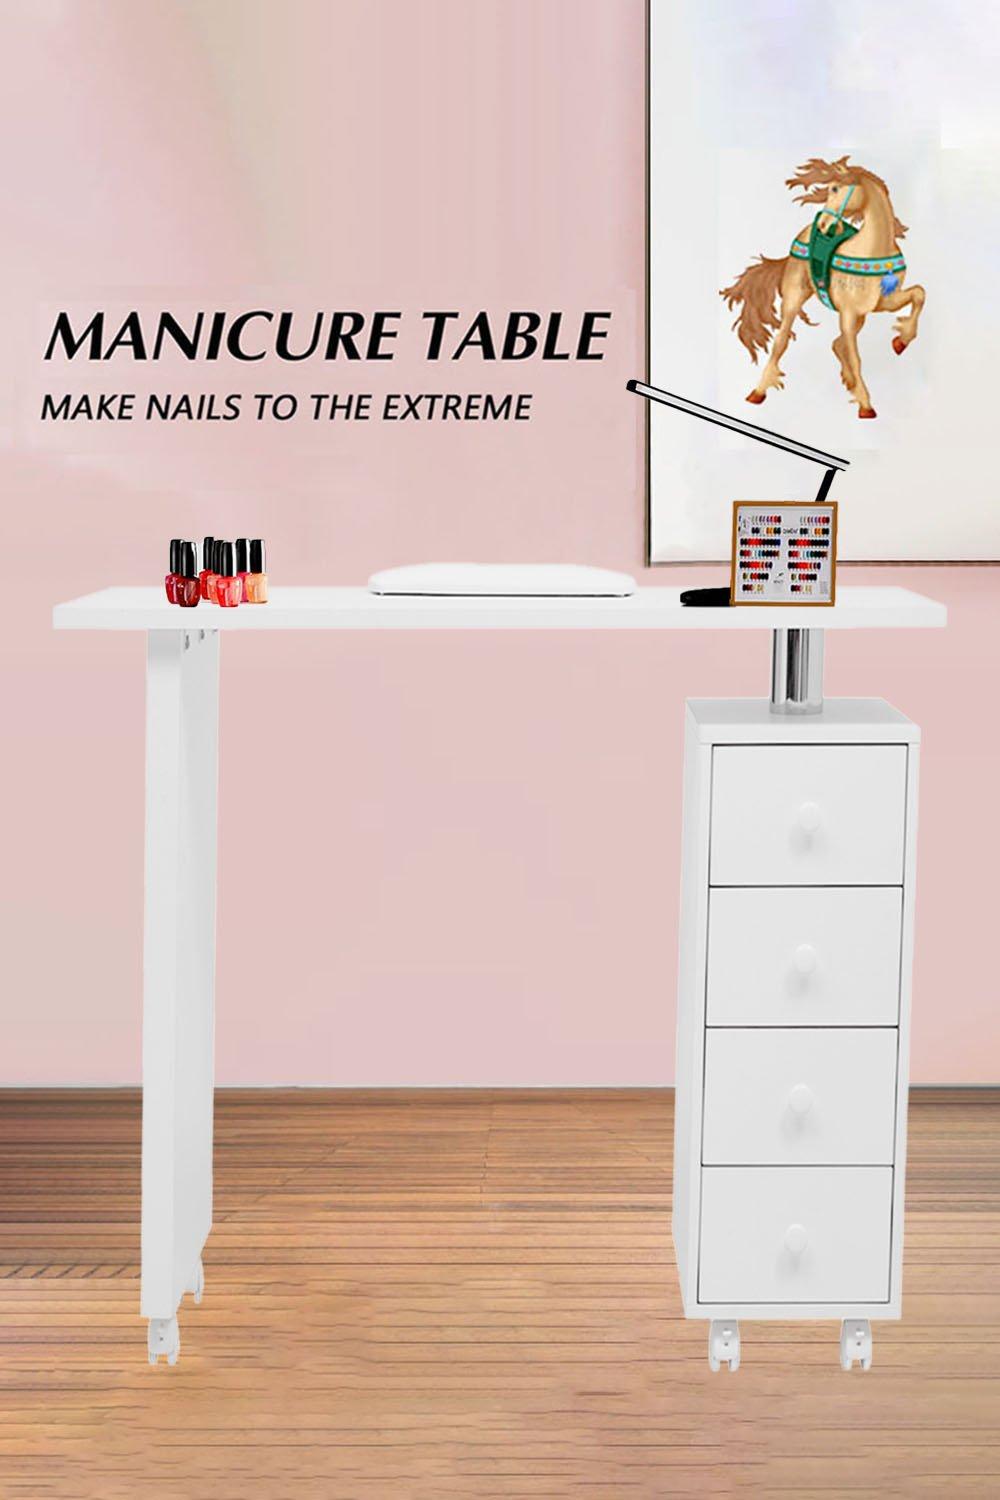 4 Drawers Pro Manicure Nail Table Beauty Salon Desk With Wheels